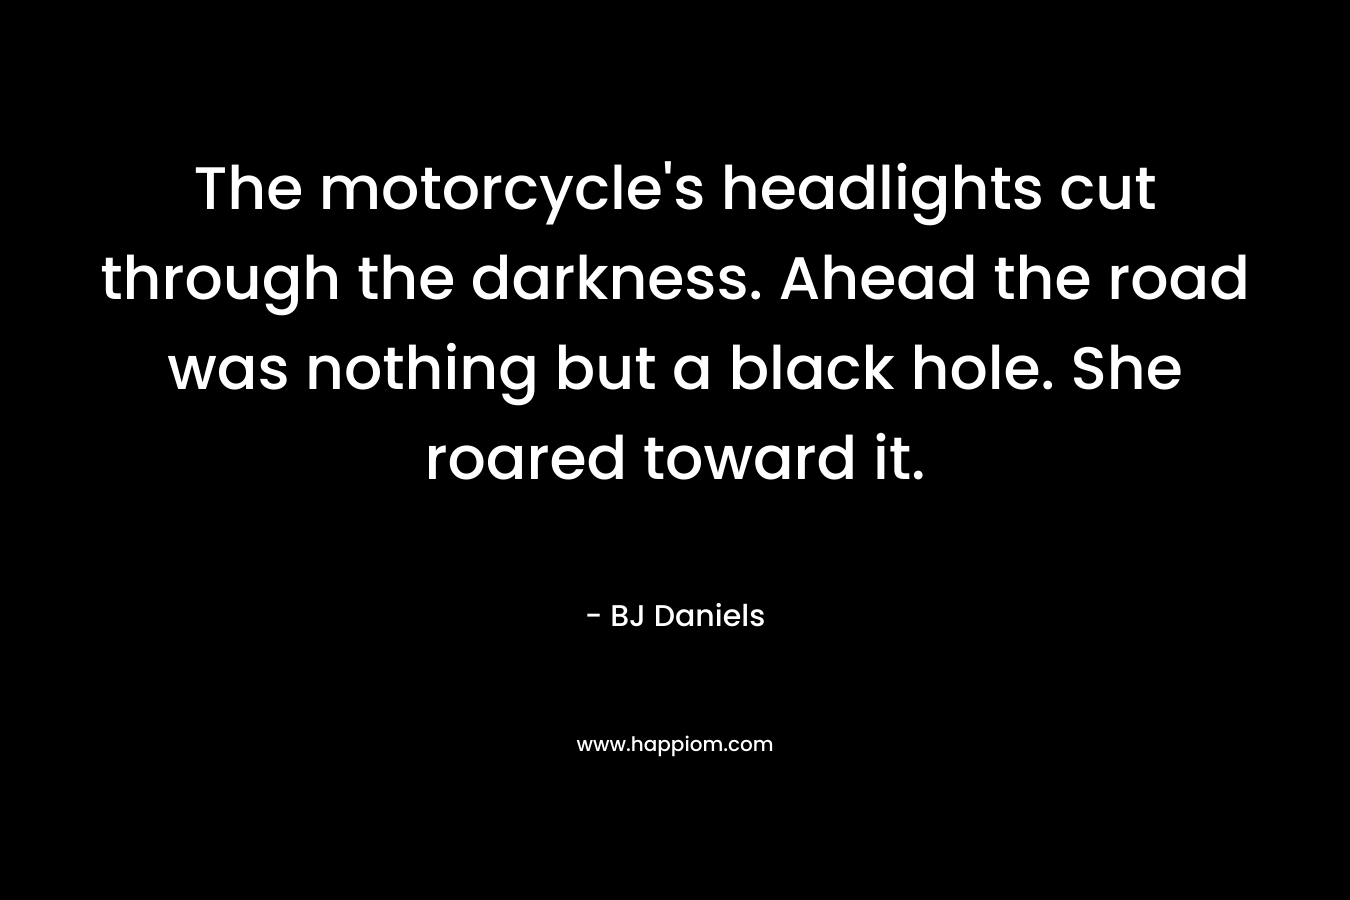 The motorcycle’s headlights cut through the darkness. Ahead the road was nothing but a black hole. She roared toward it. – BJ Daniels